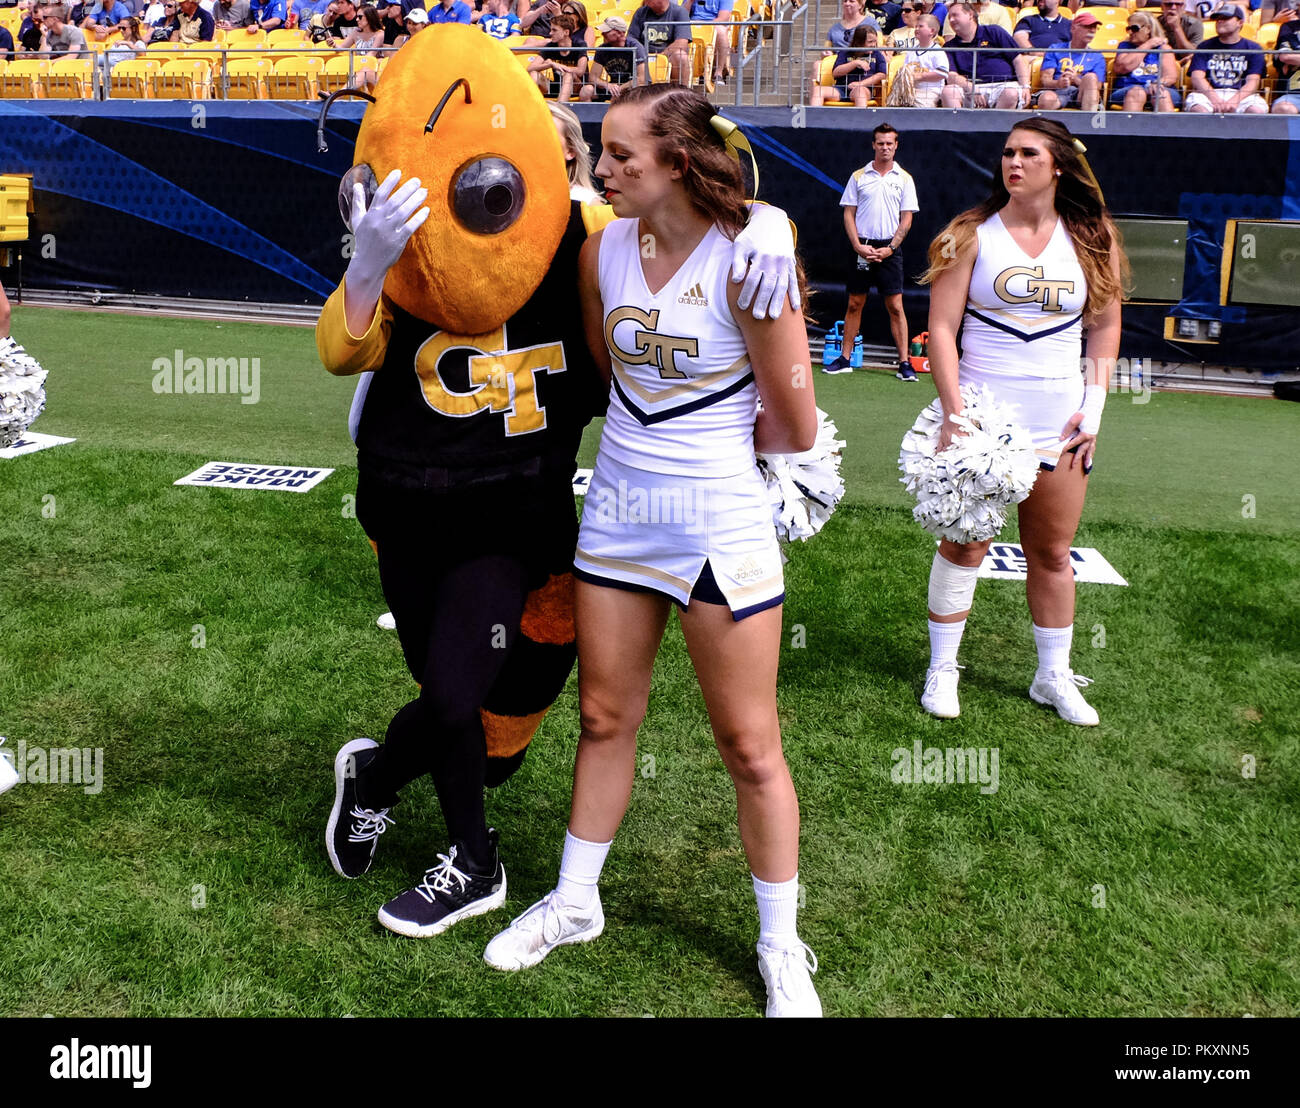 Pittsburgh, PA, USA. 15th Sep, 2018. Yellow Jackets mascot and cheerleaders  during the Pitt Panthers vs